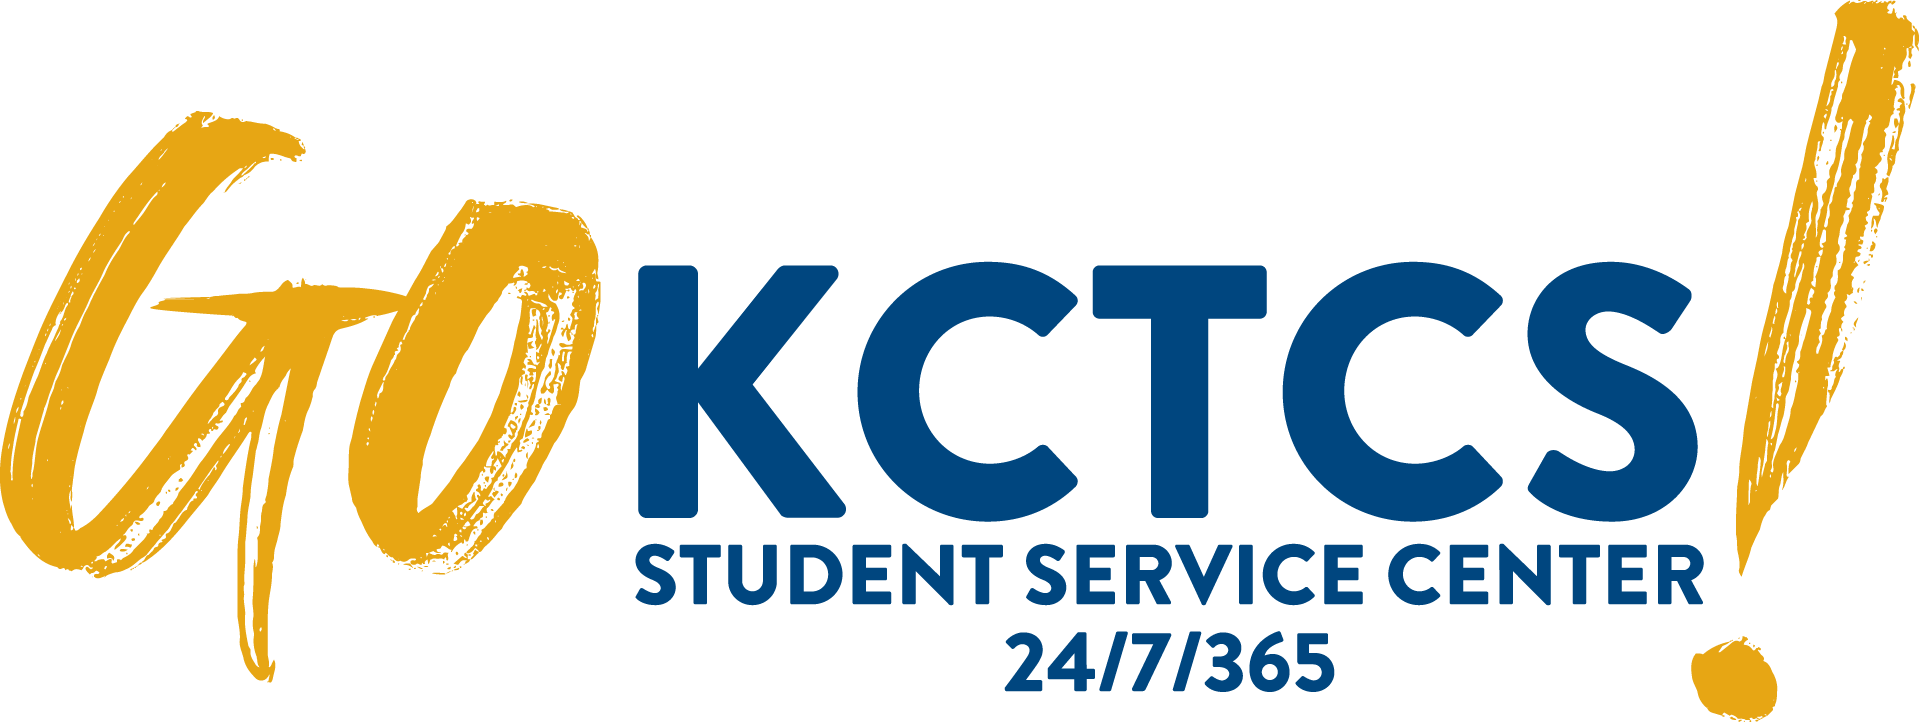 Go KCTCS colored logo